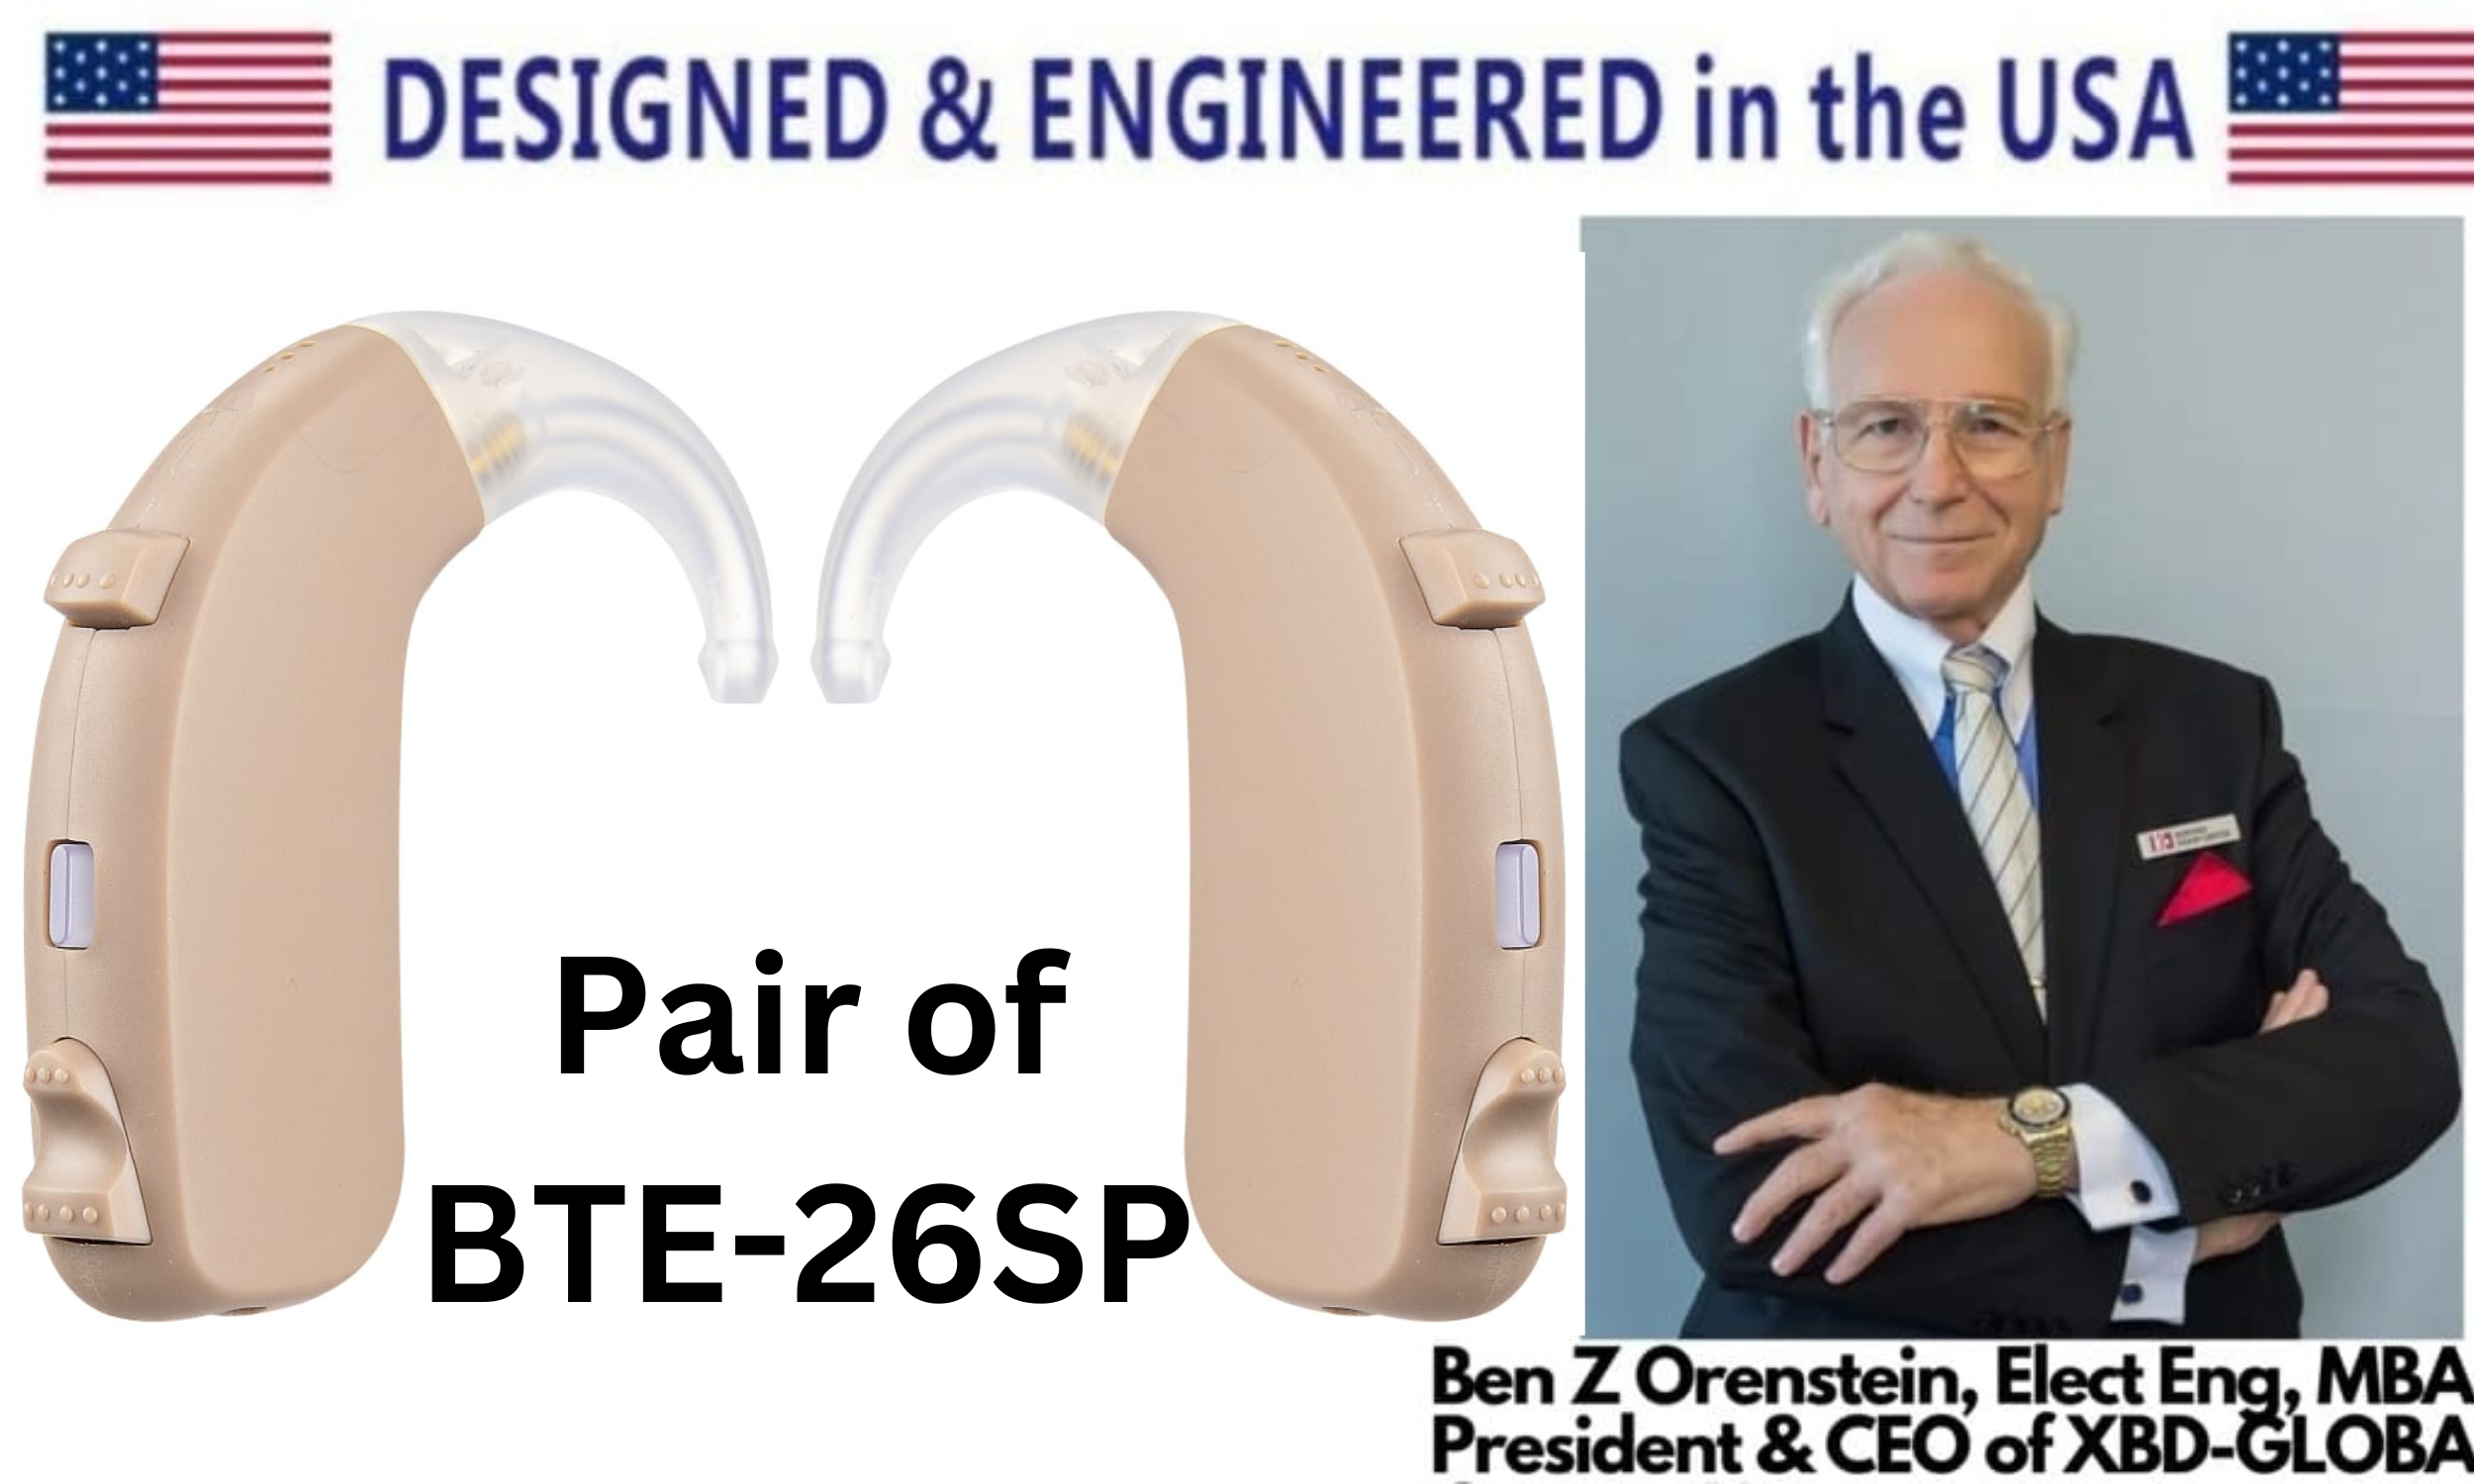 eEAR® Pair of BTE-26SP Peak Gain 70dB Improved Behind The Ear BTE Digital Hearing Aid Designed for Severe Hearing Loss Designed and Engineered in the USA Sold 5,000+ worldwide